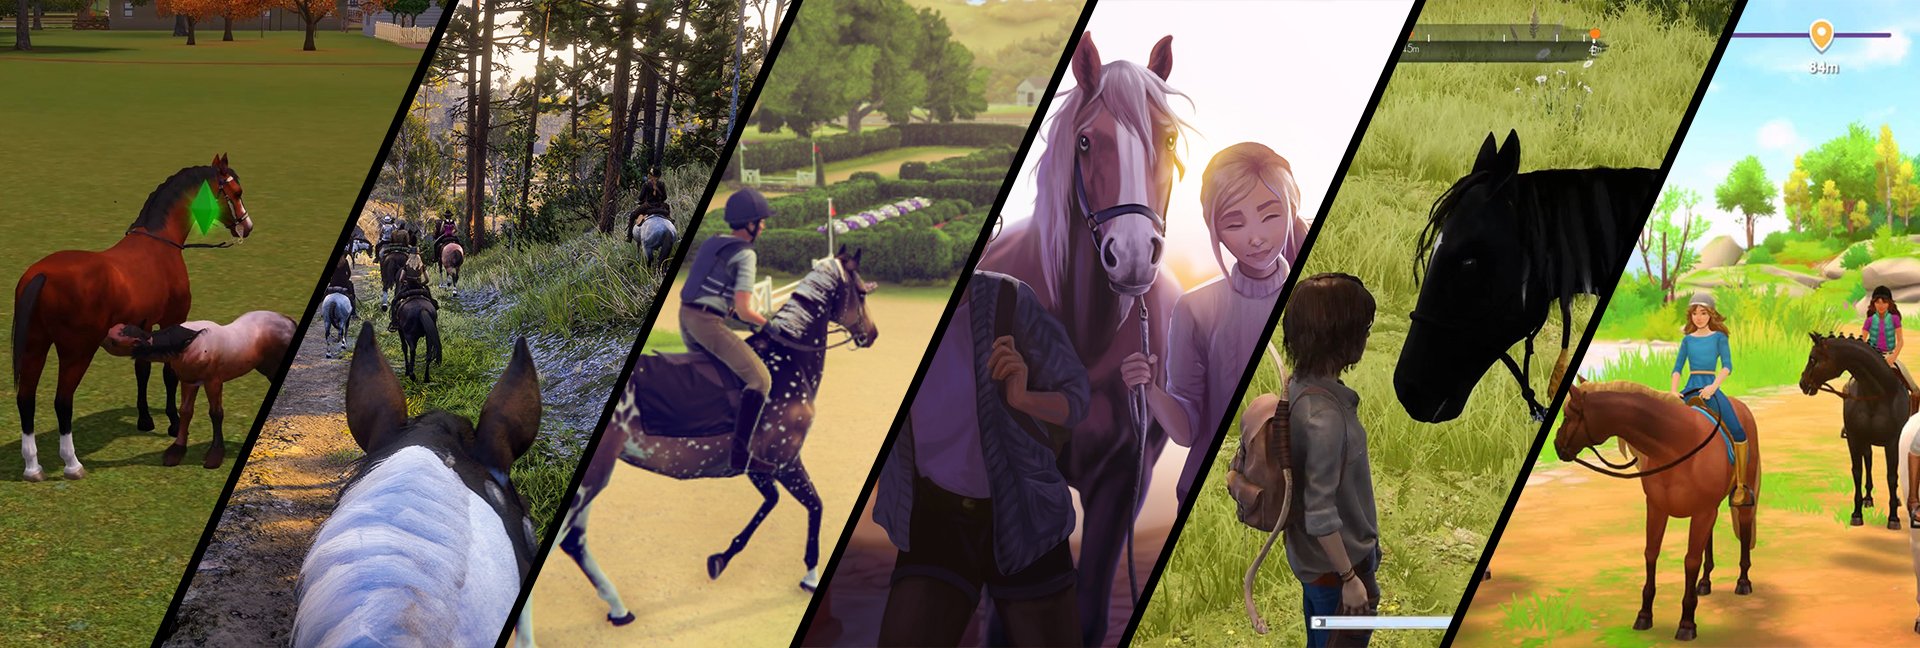 The Best Horse Games to play on PC and Console in 2022 — The Mane Quest